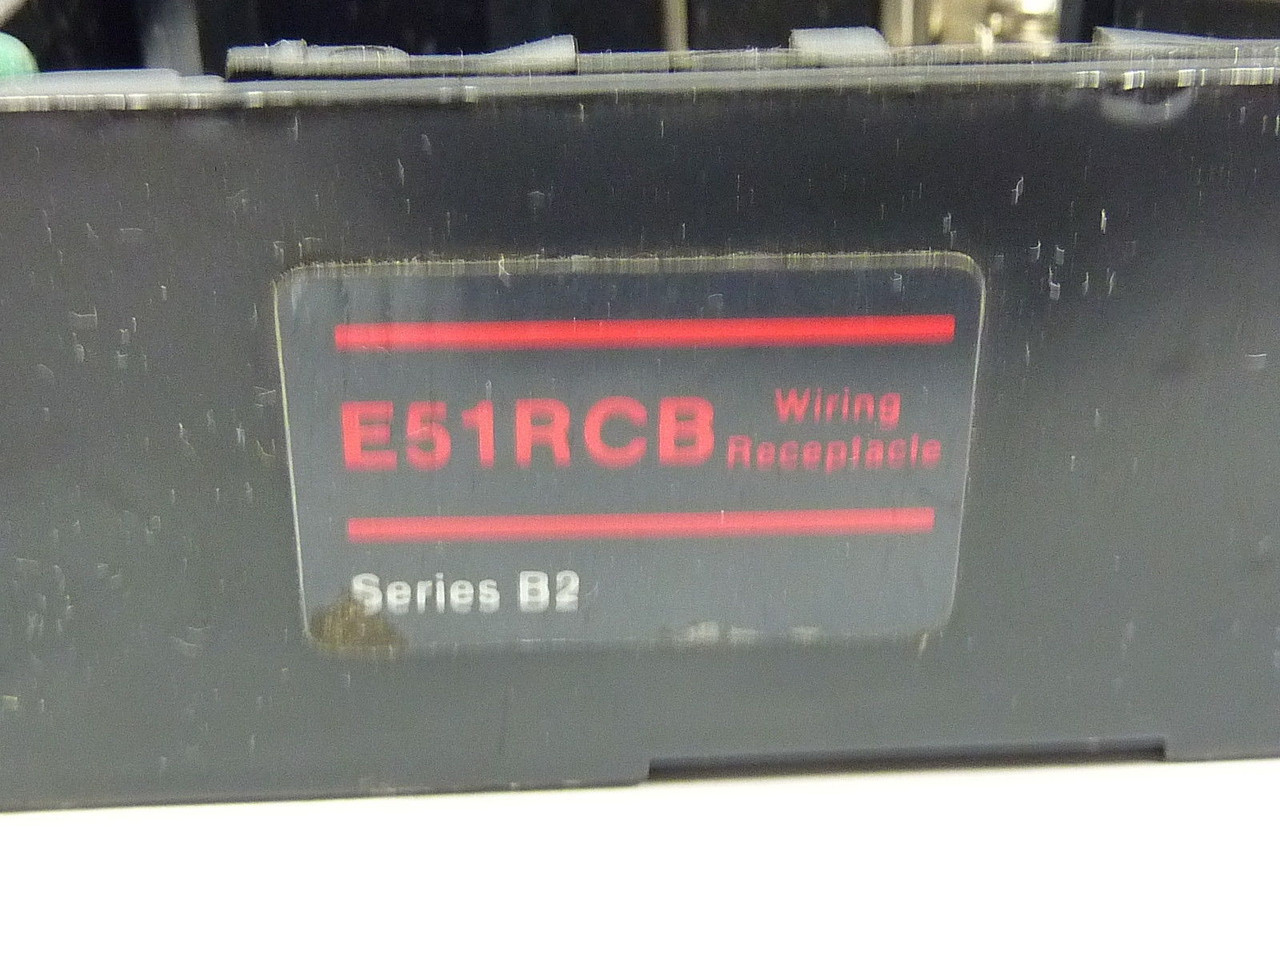 Cutler Hammer E51-RCB Series B2 Photoelectric Wiring Receptacle 120VAC 4W USED